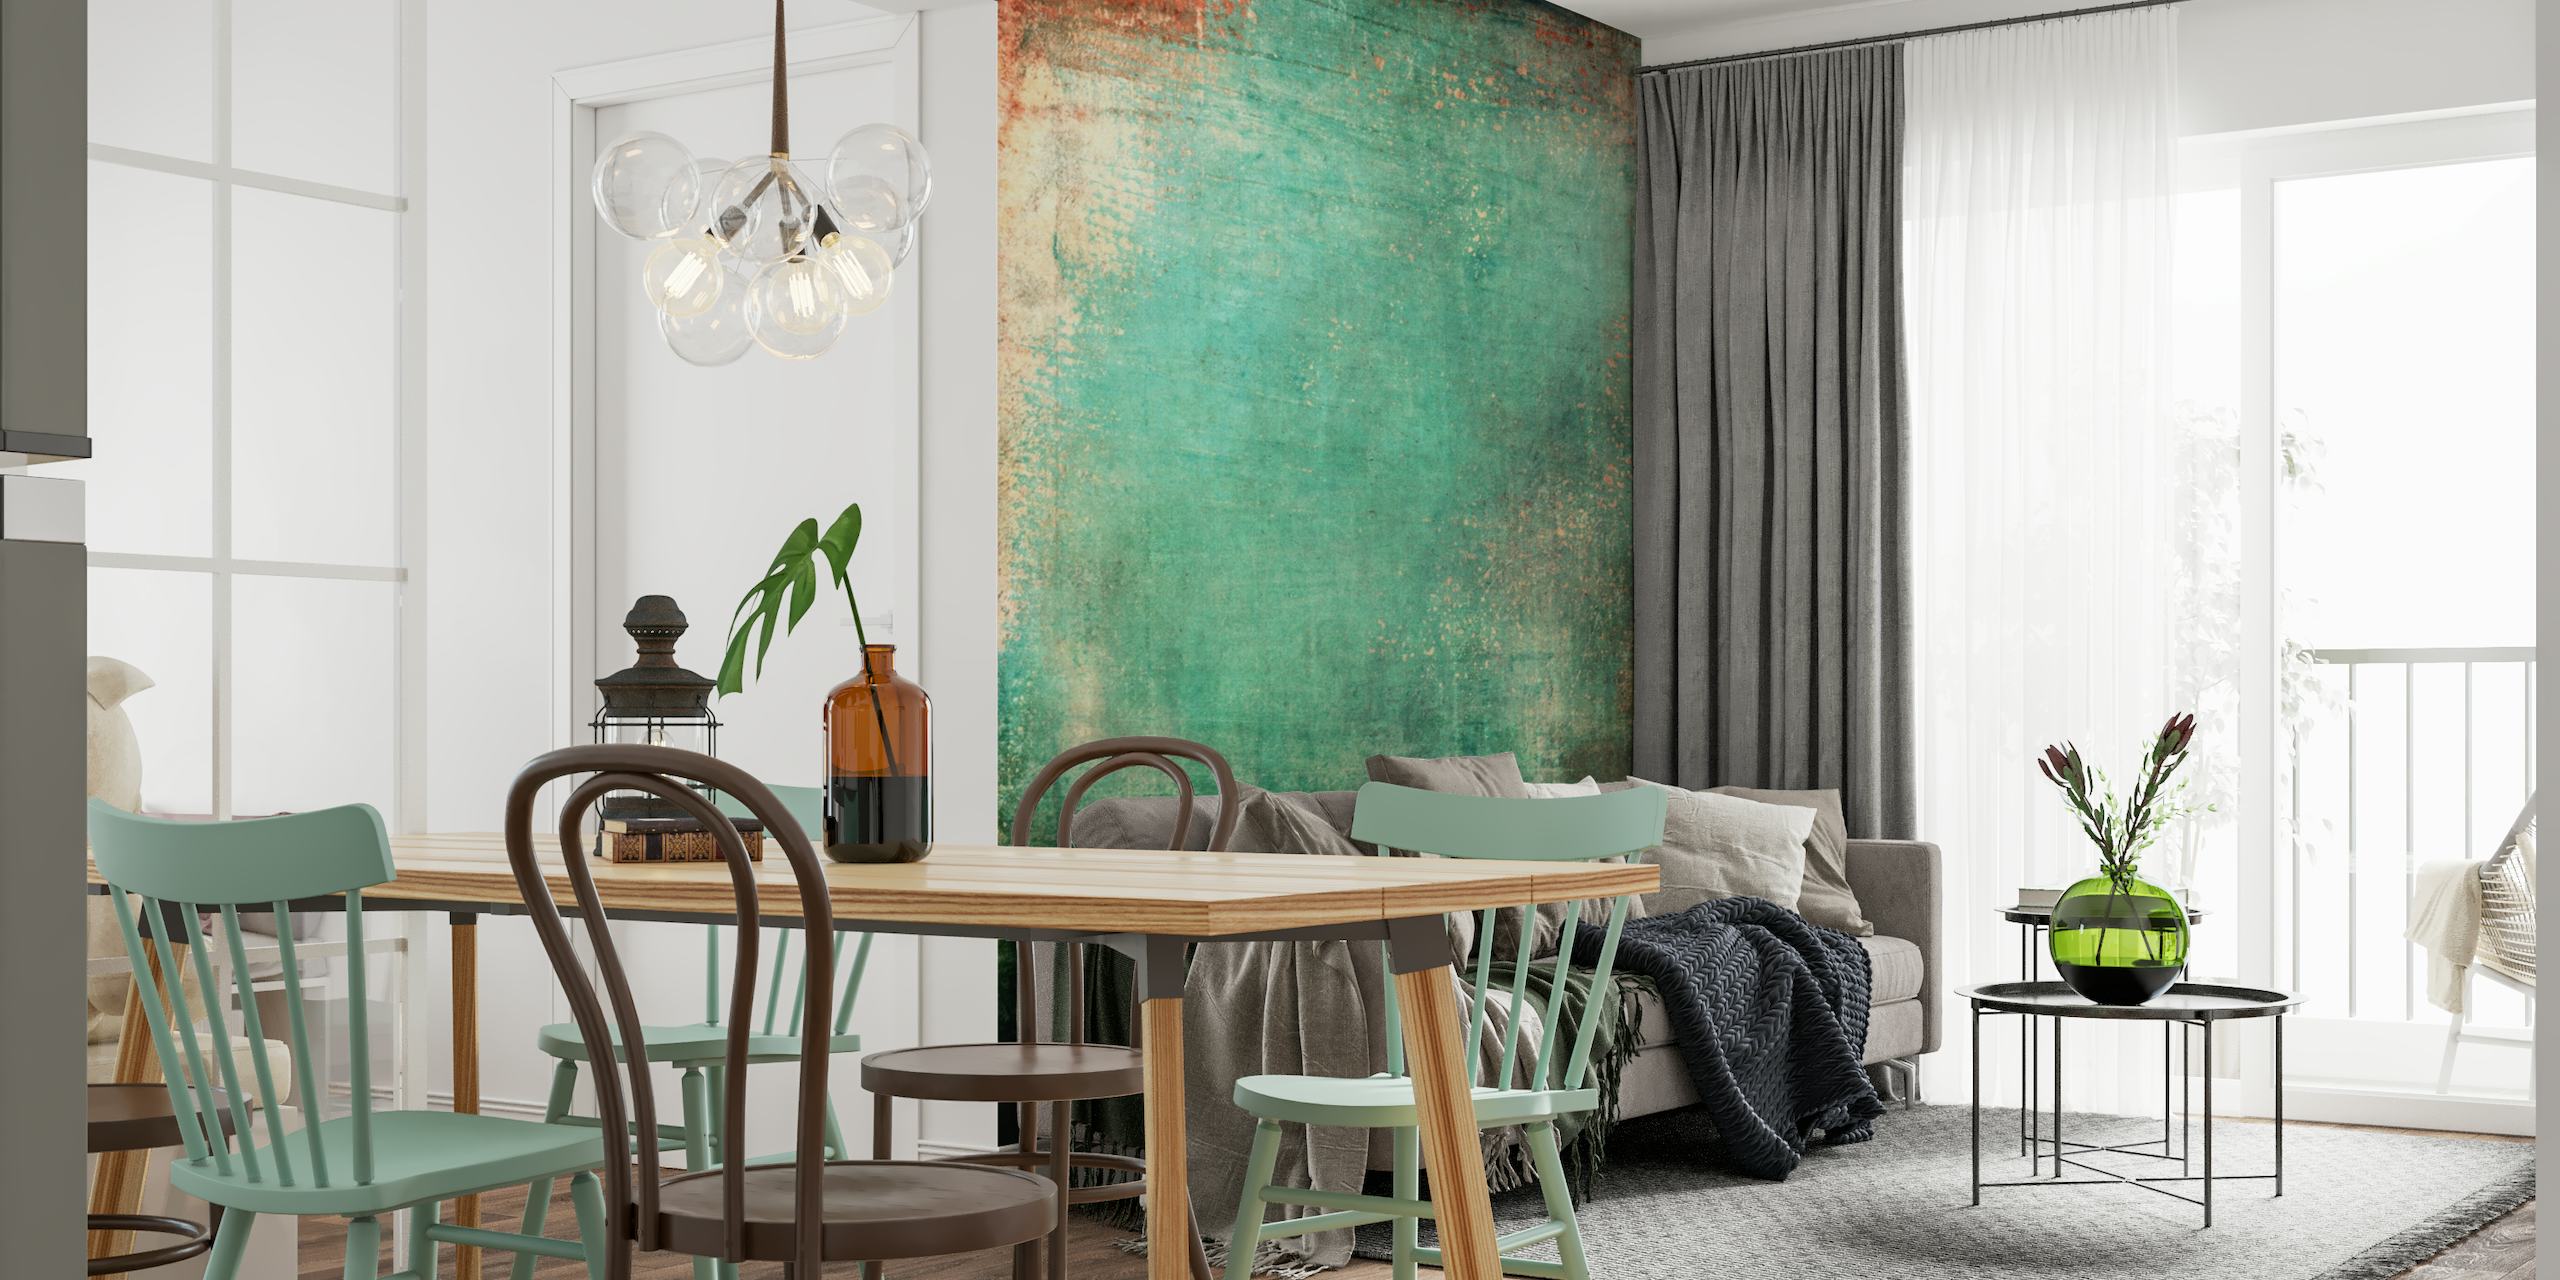 Abstract aqua-toned wall mural named Hope with a textured, weathered appearance